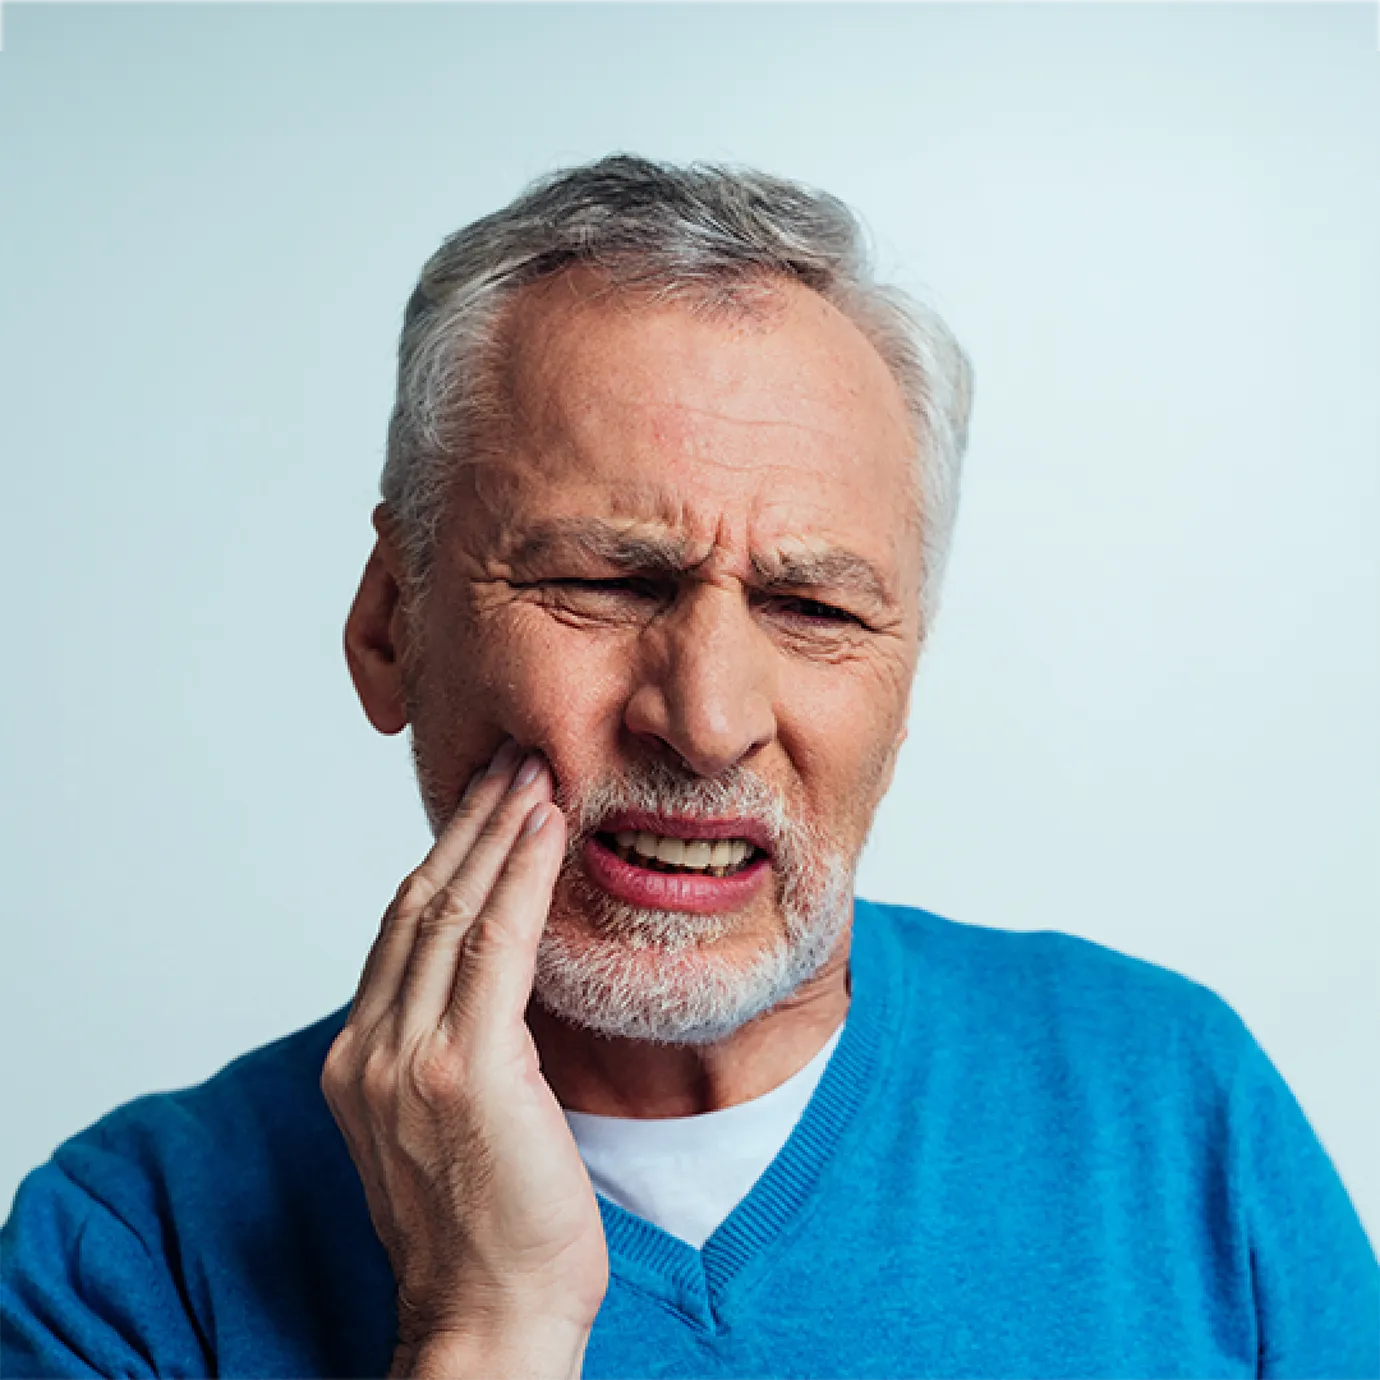 Bad breath caused by gum infection